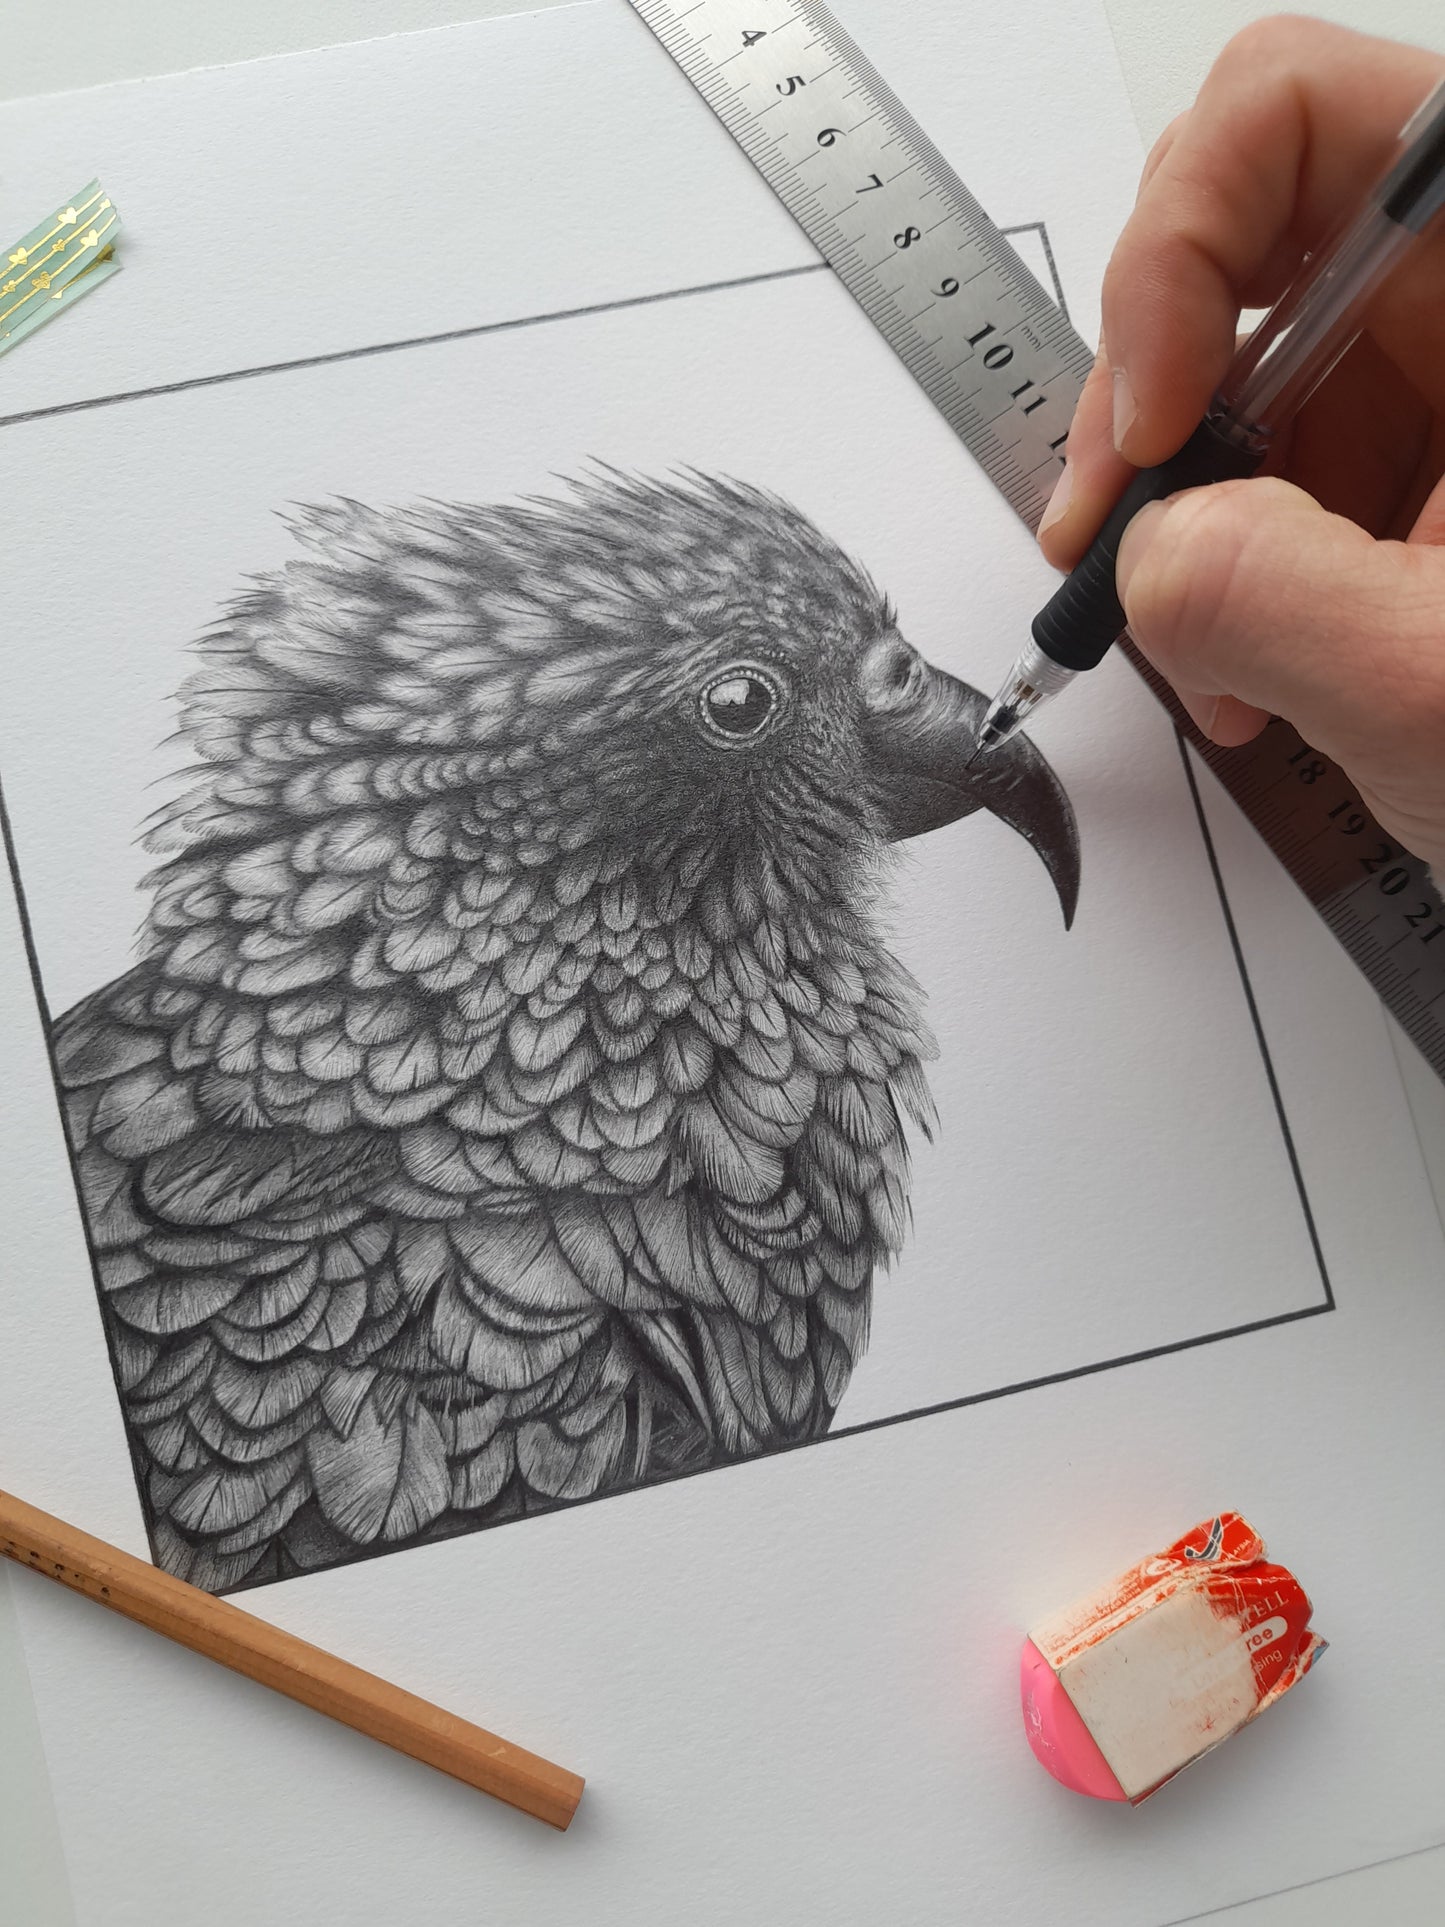 Ruffle my Feathers Baby - Kea - Limited Edition A4 Giclee Print